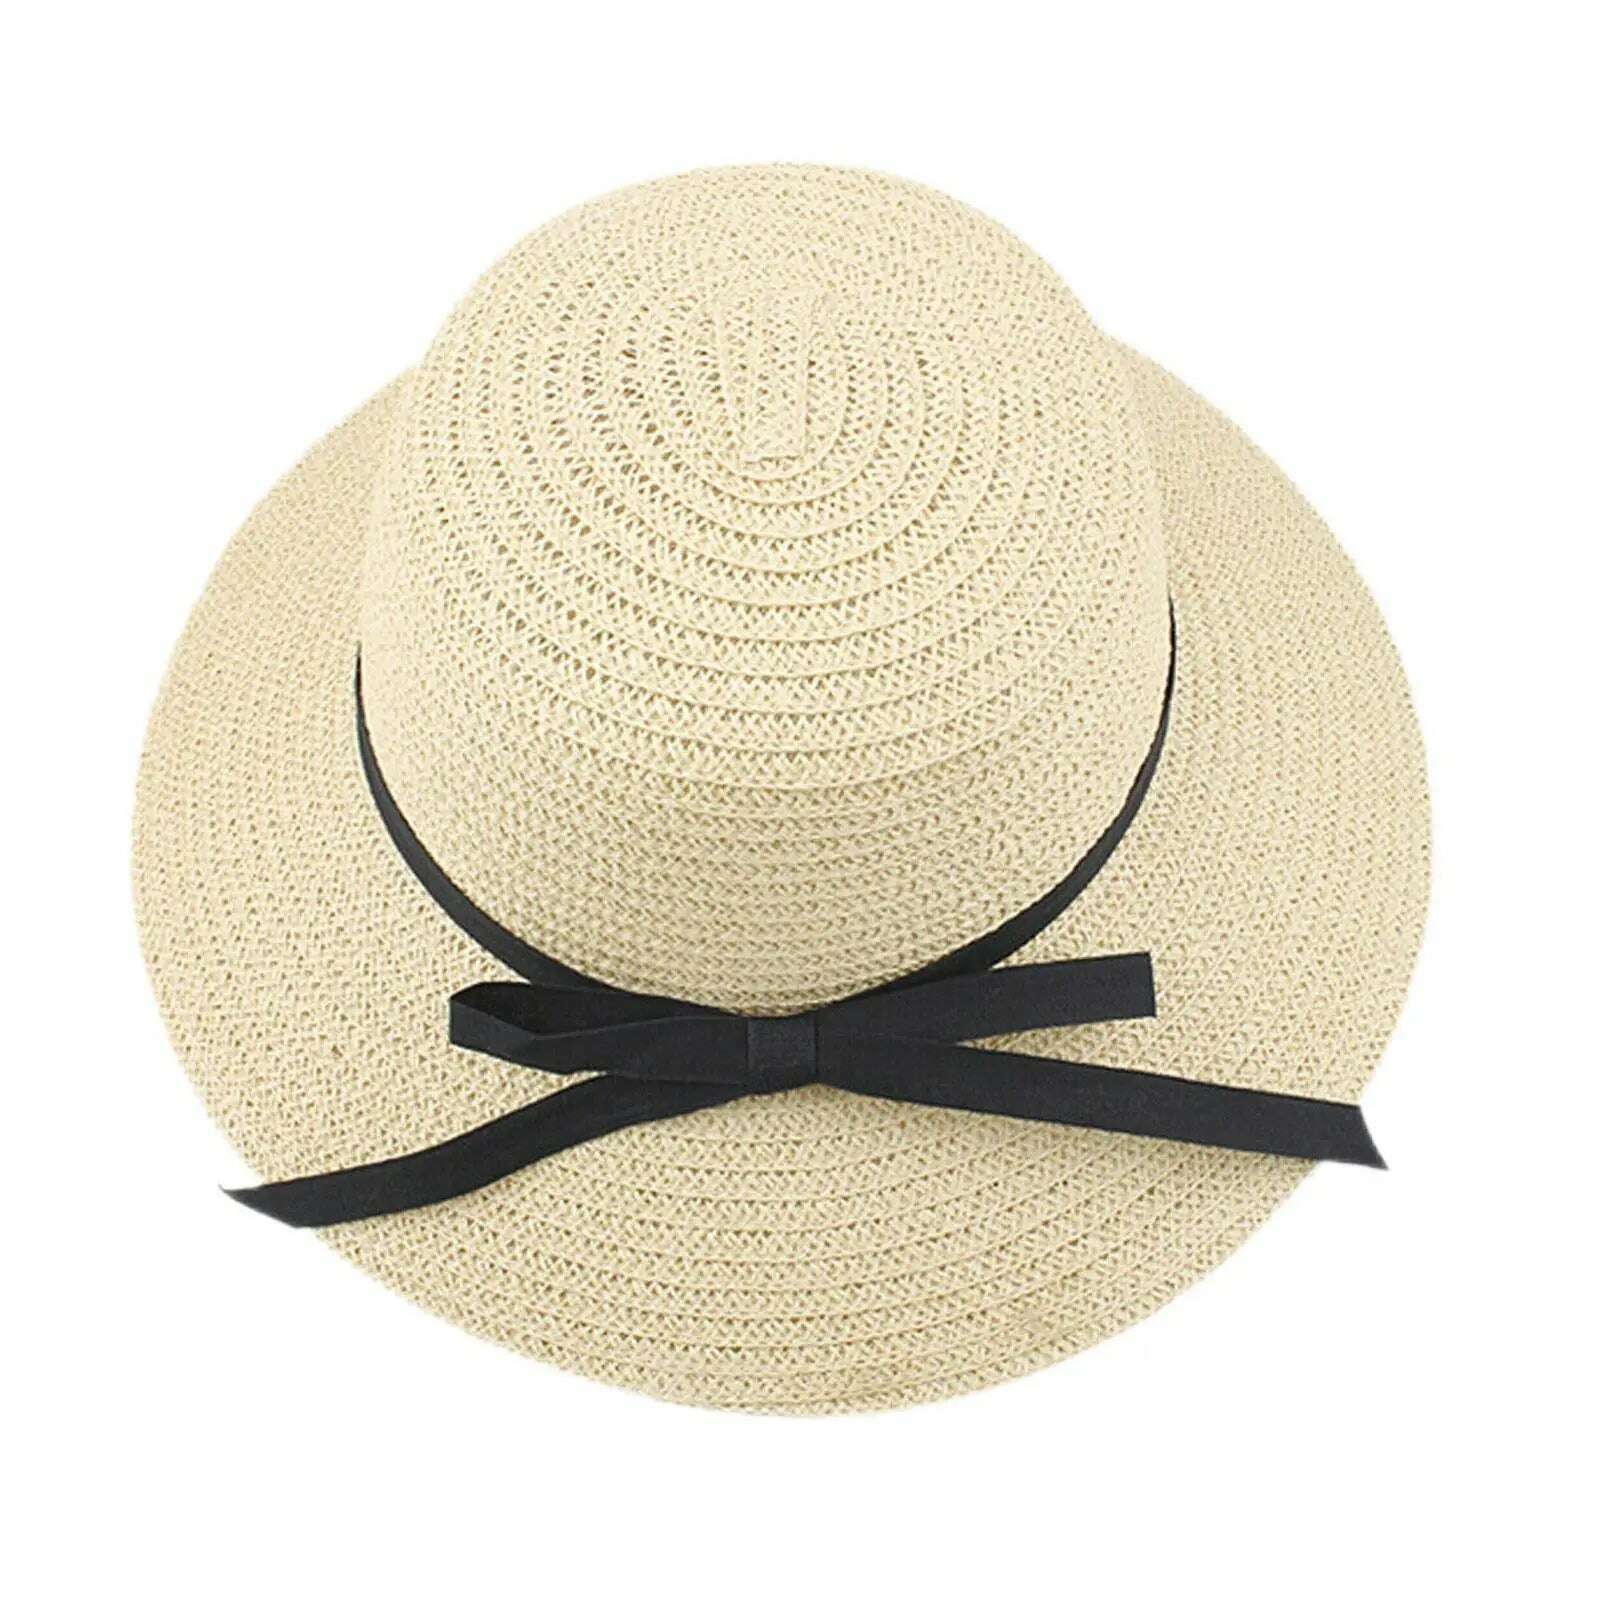 KIMLUD, Women's Straw Sun Hat Wide Brim Flat Beach Hat Summer Sun Protection Cowboy Style Hat Rolled Up Packable Panama Hats, B style Beige / One Size / China, KIMLUD Womens Clothes